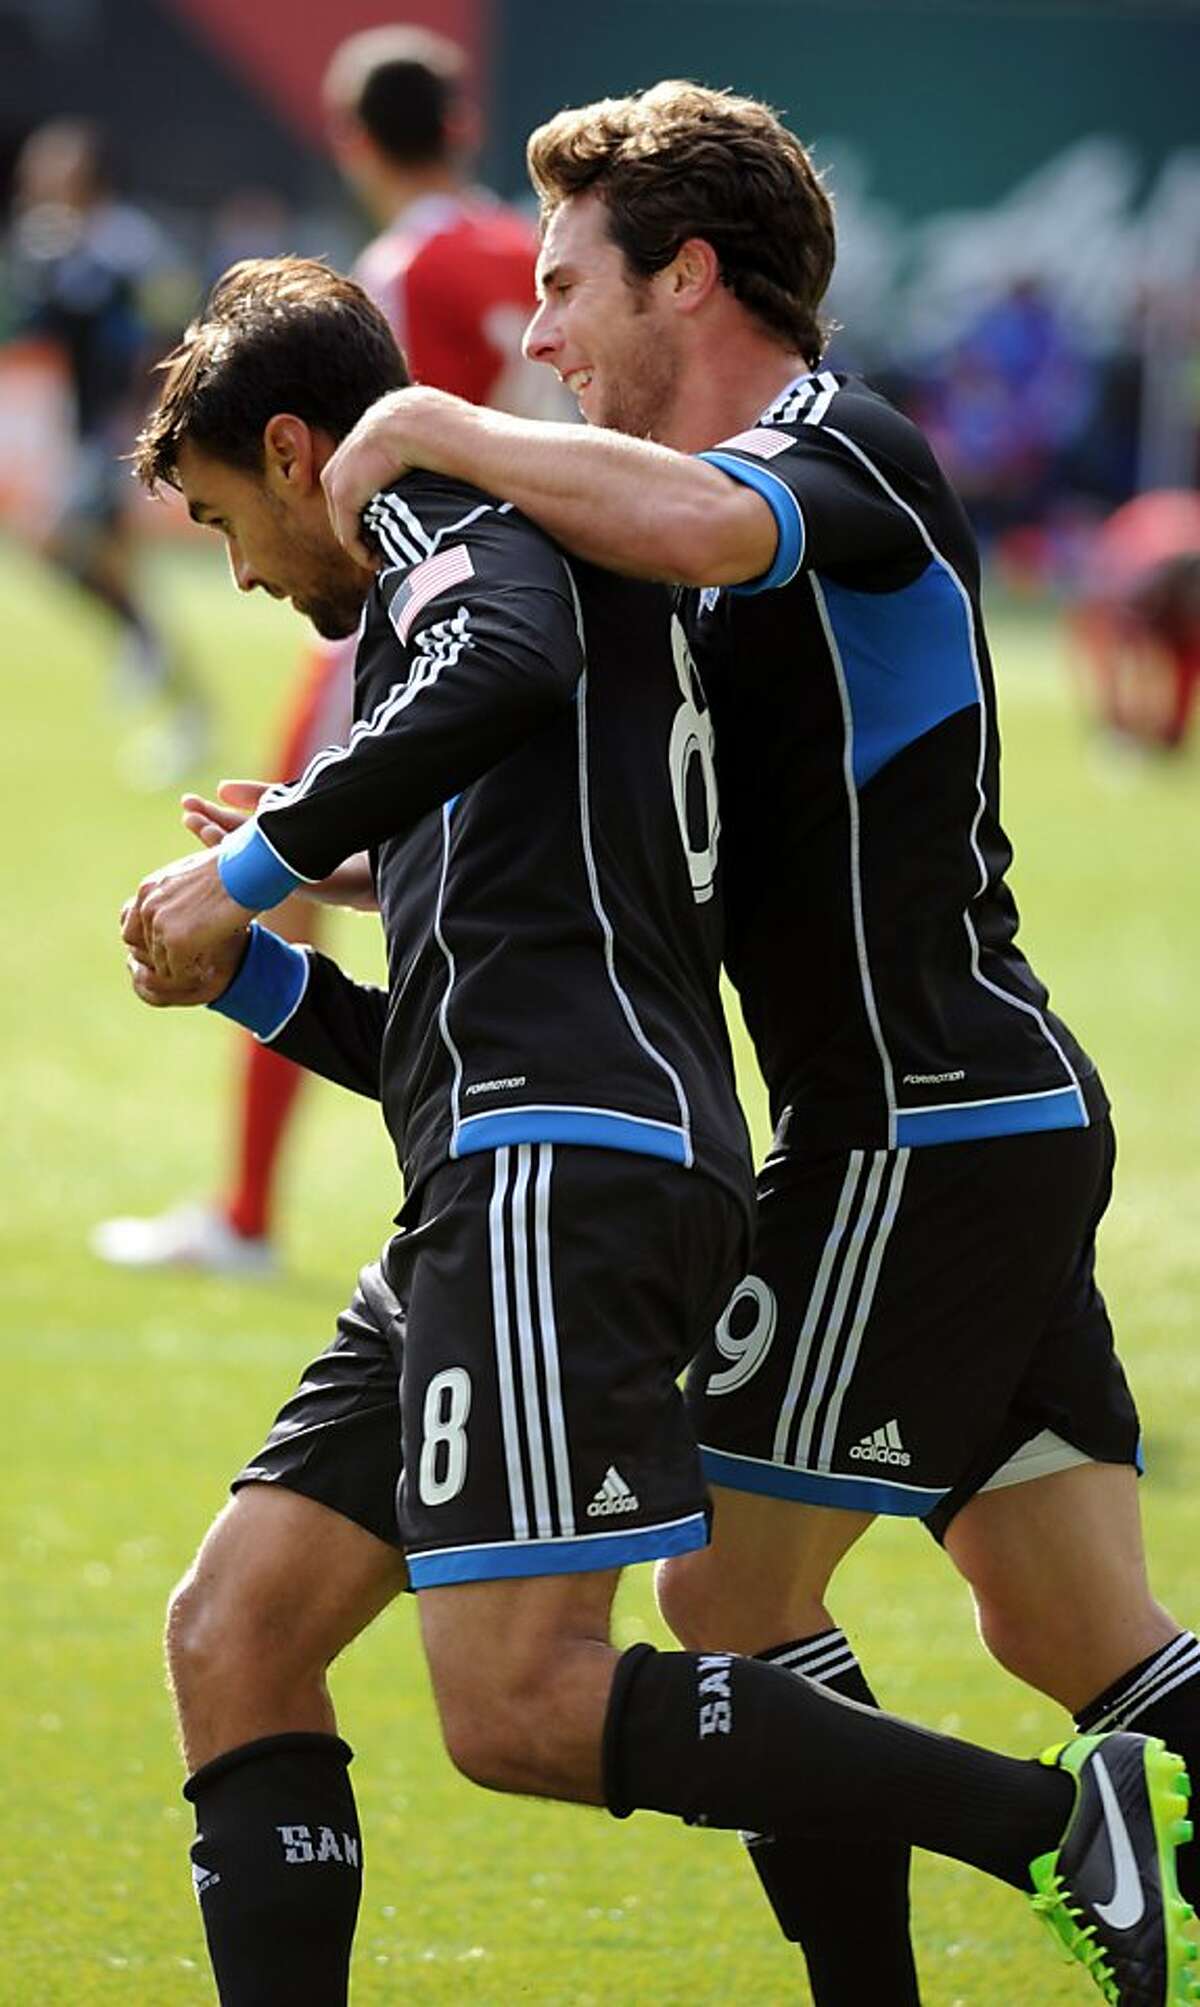 PORTLAND, OR - FEBRUARY 23: Chris Wondolowski #8 of San Jose Earthquakes celebrates with Mike Fucito #9 of San Jose Earthquakes after scoring a goal during the first half of the game against the FC Dallas at Jeld-Wen Field on February 23, 2013 in Portland, Oregon. (Photo by Steve Dykes/Getty Images)